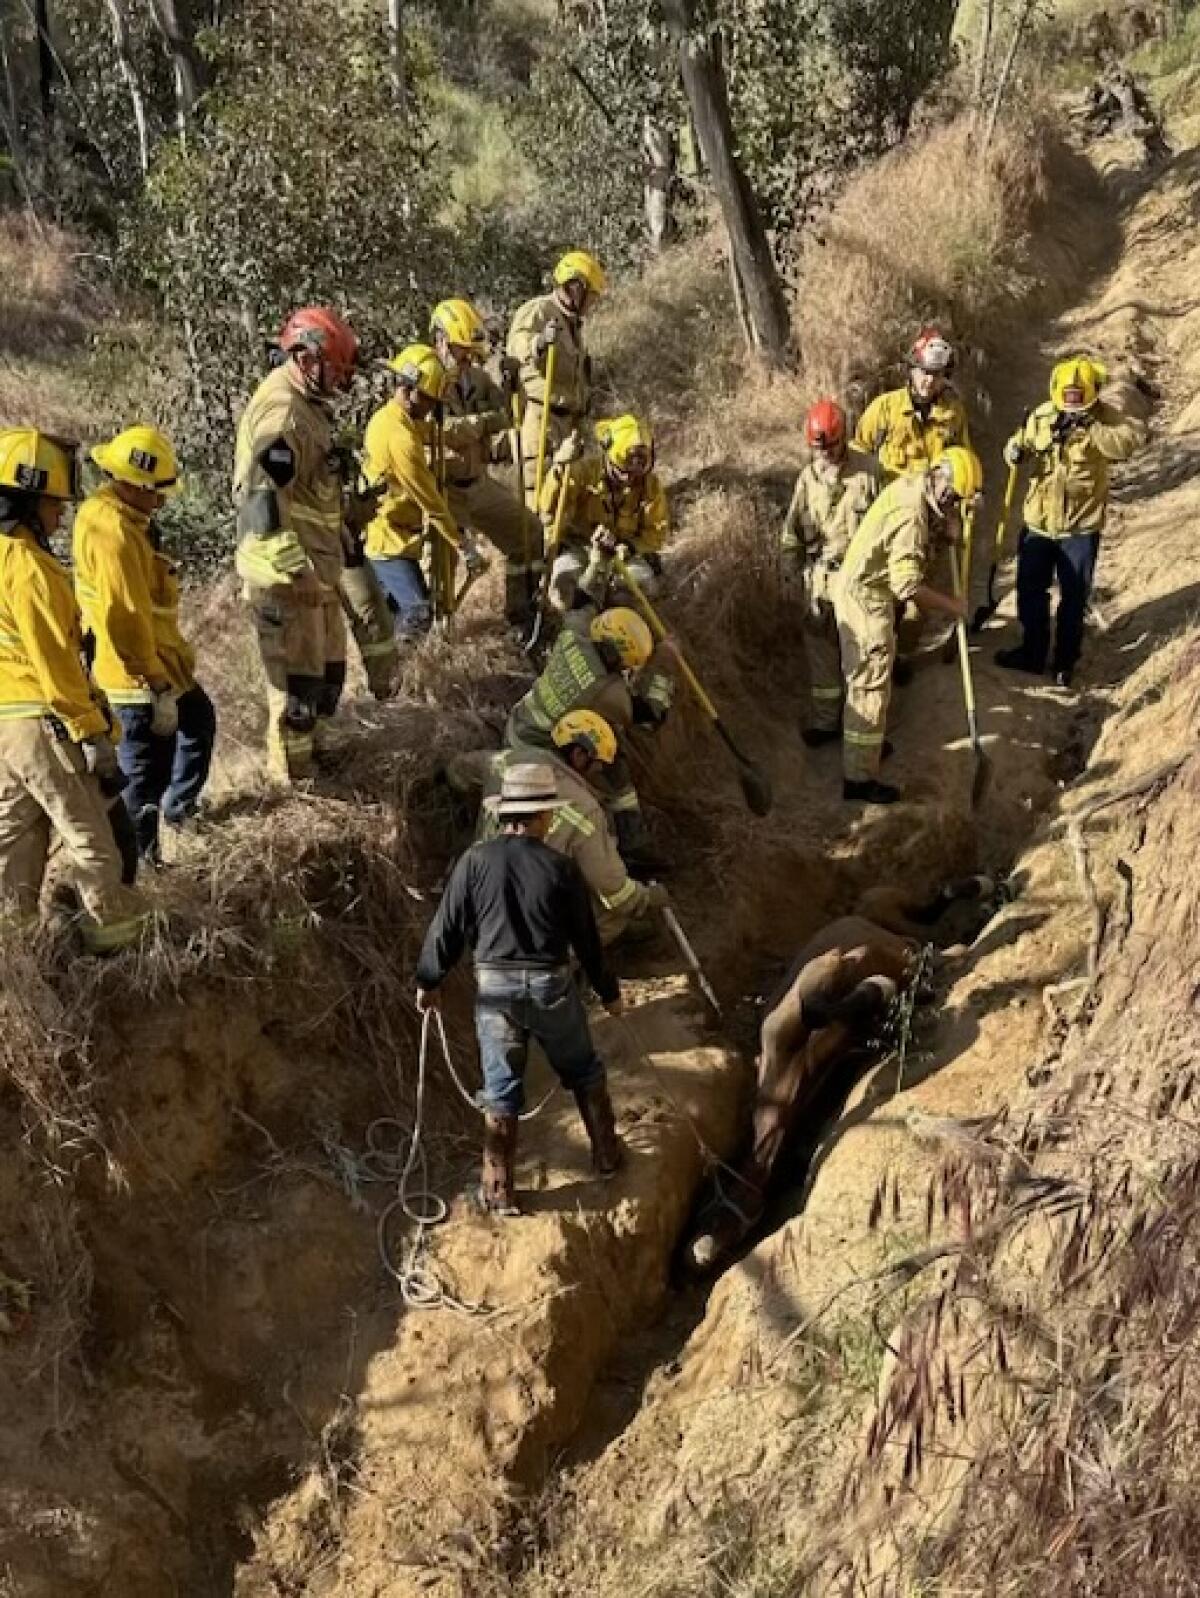 More than a dozen rescuers surround a horse trapped in a dirt ditch.